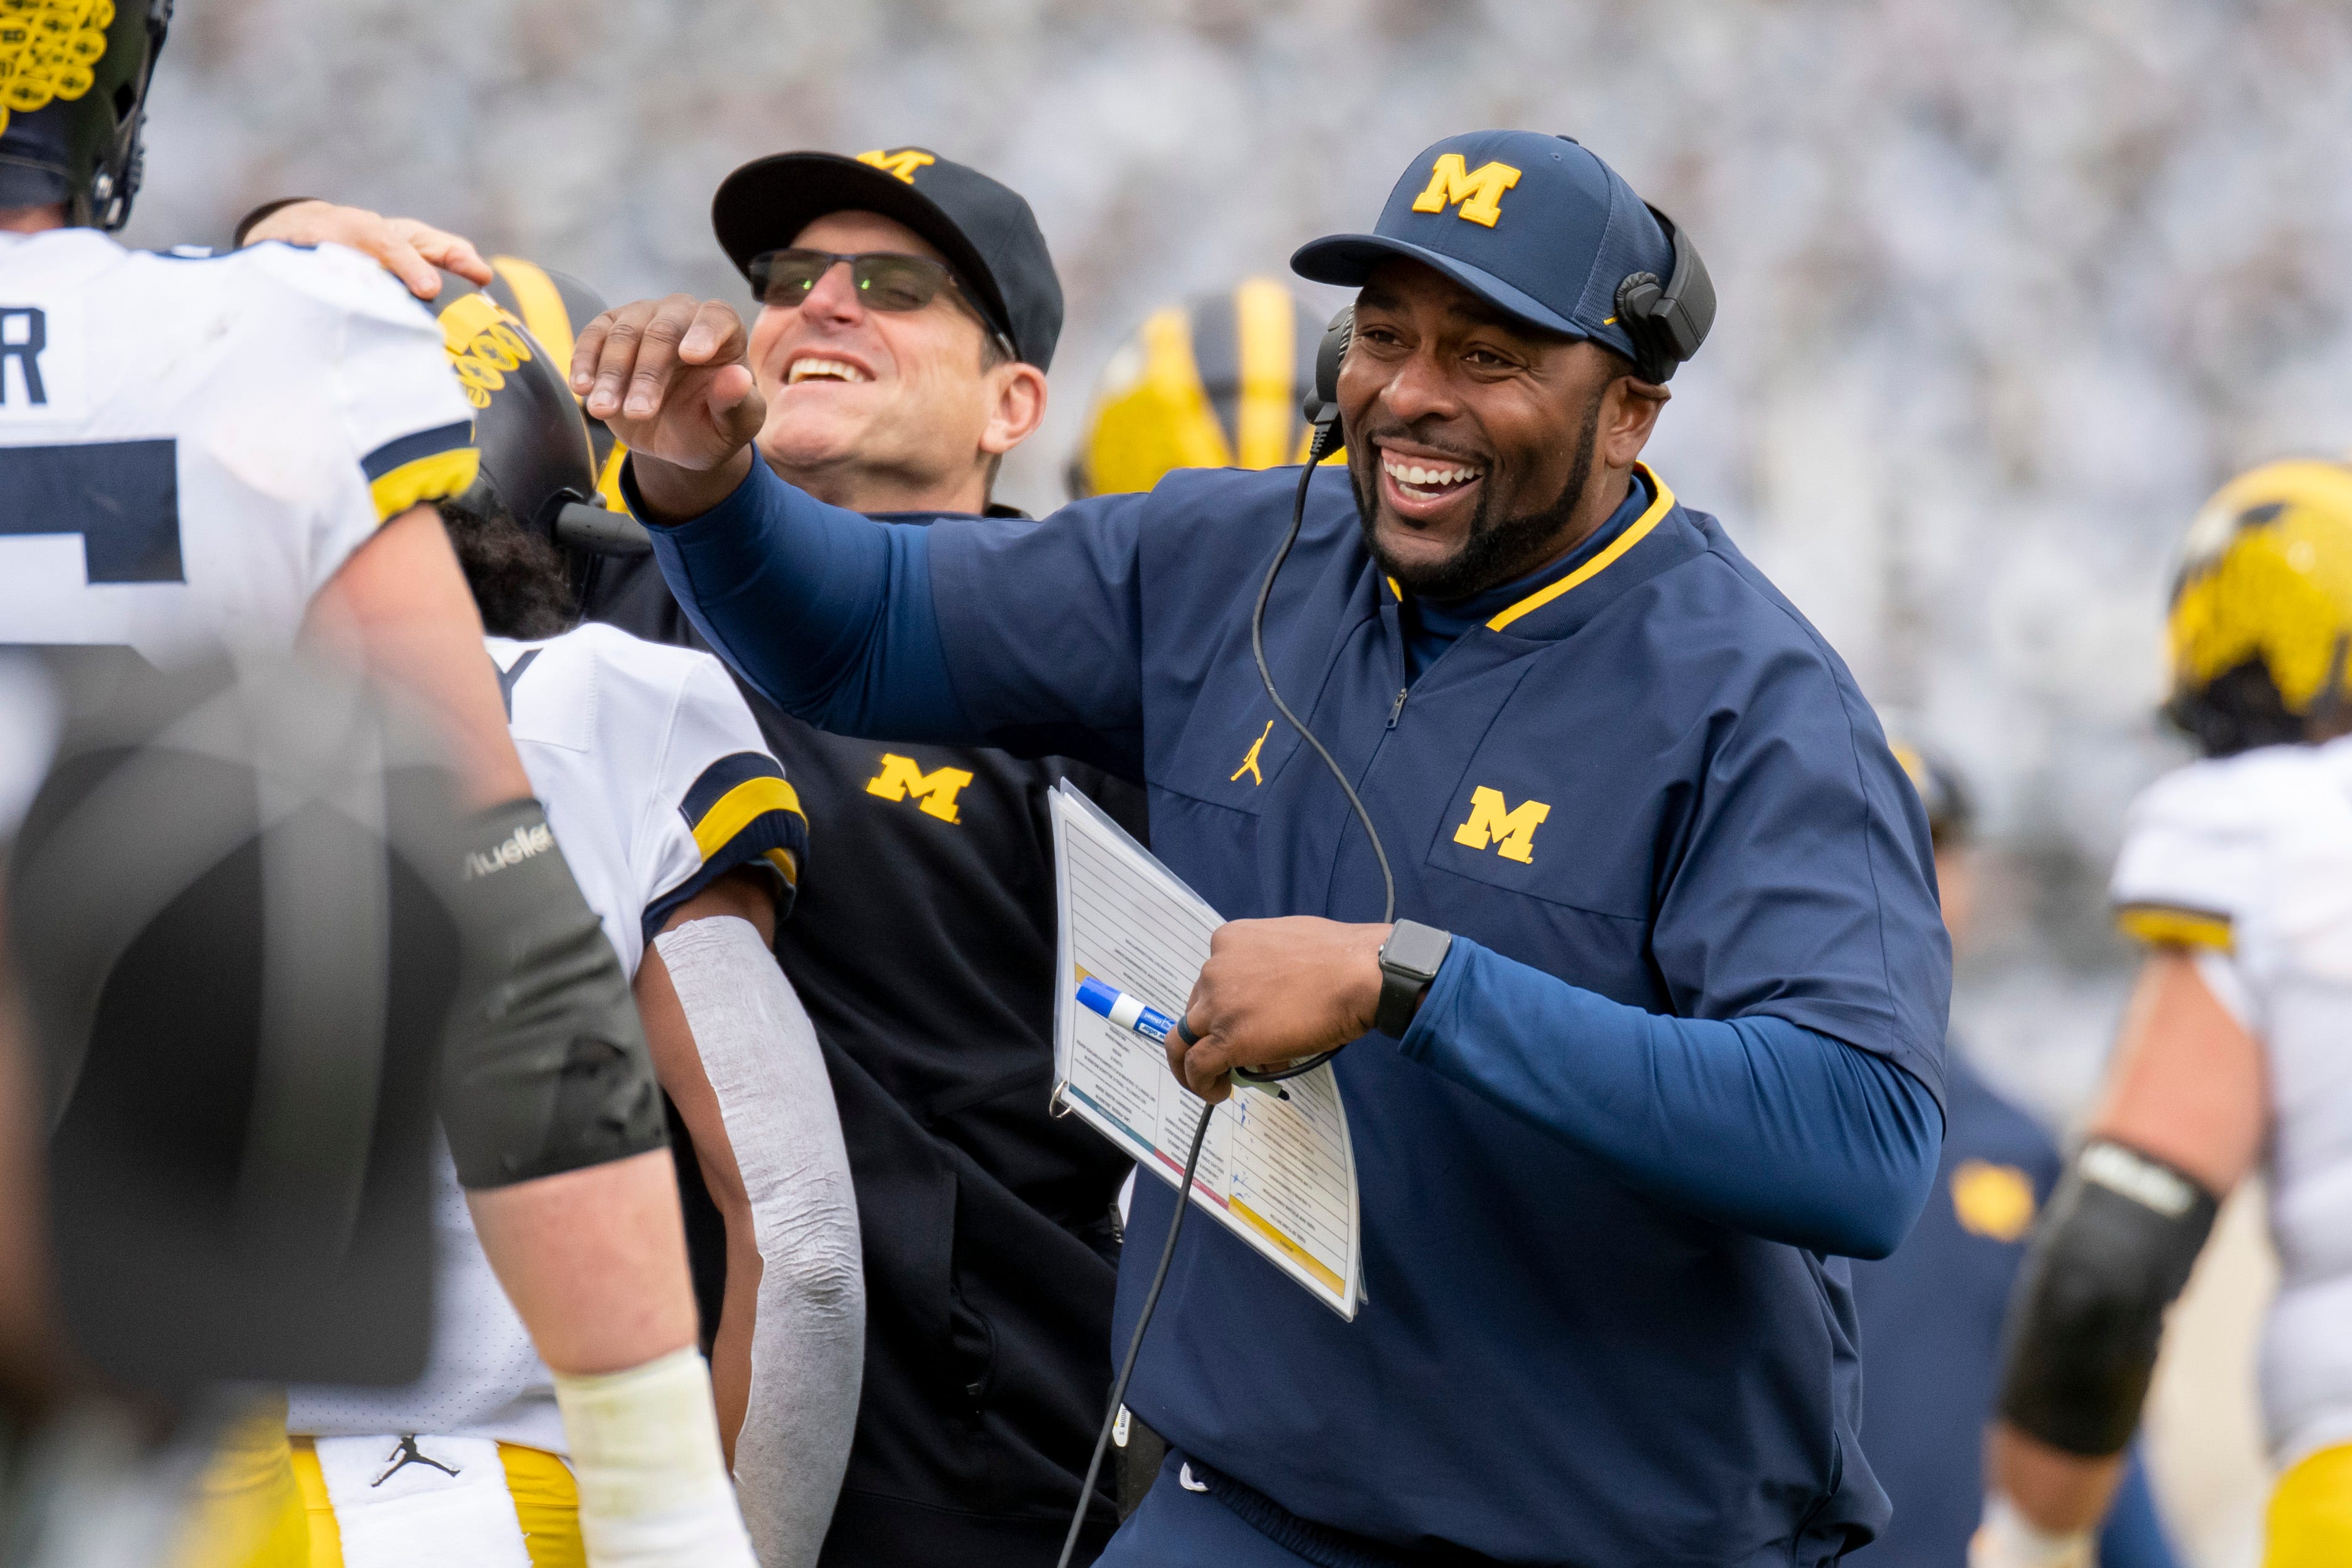 Here are contract details for Michigan's assistant football coaches